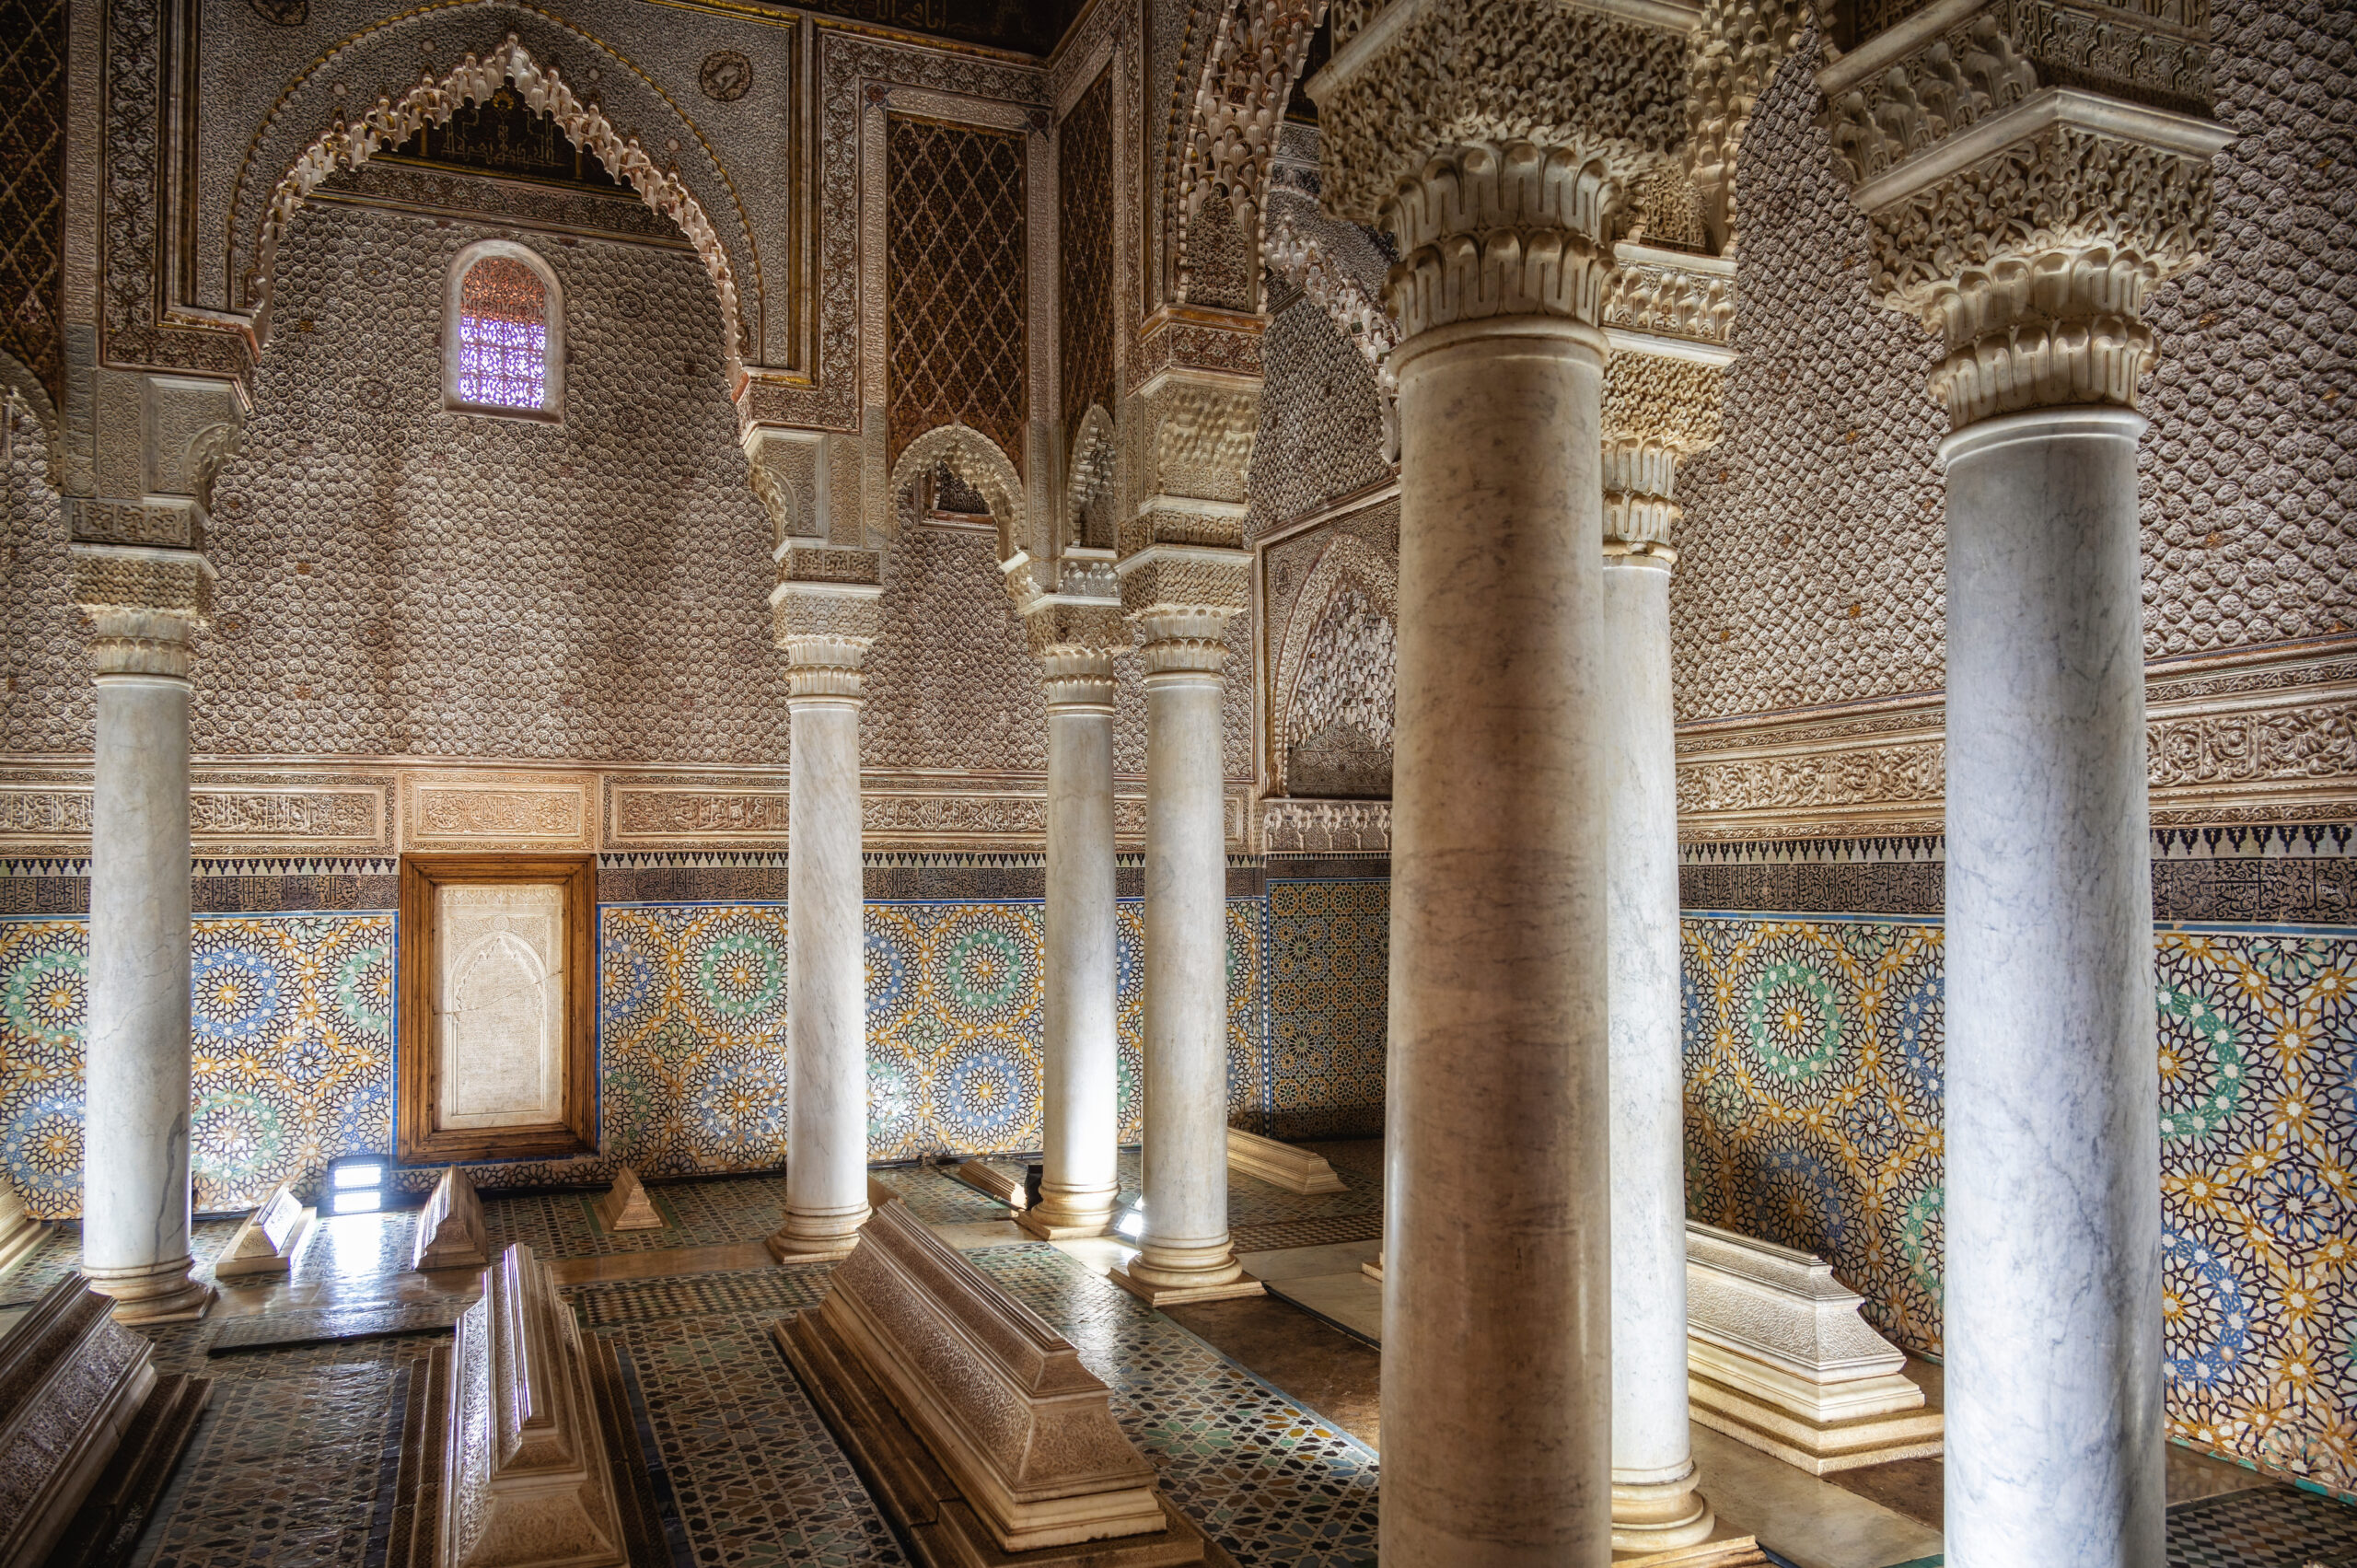 production-services-and-filming-in-marocco-tombs-with-decorative-tiles